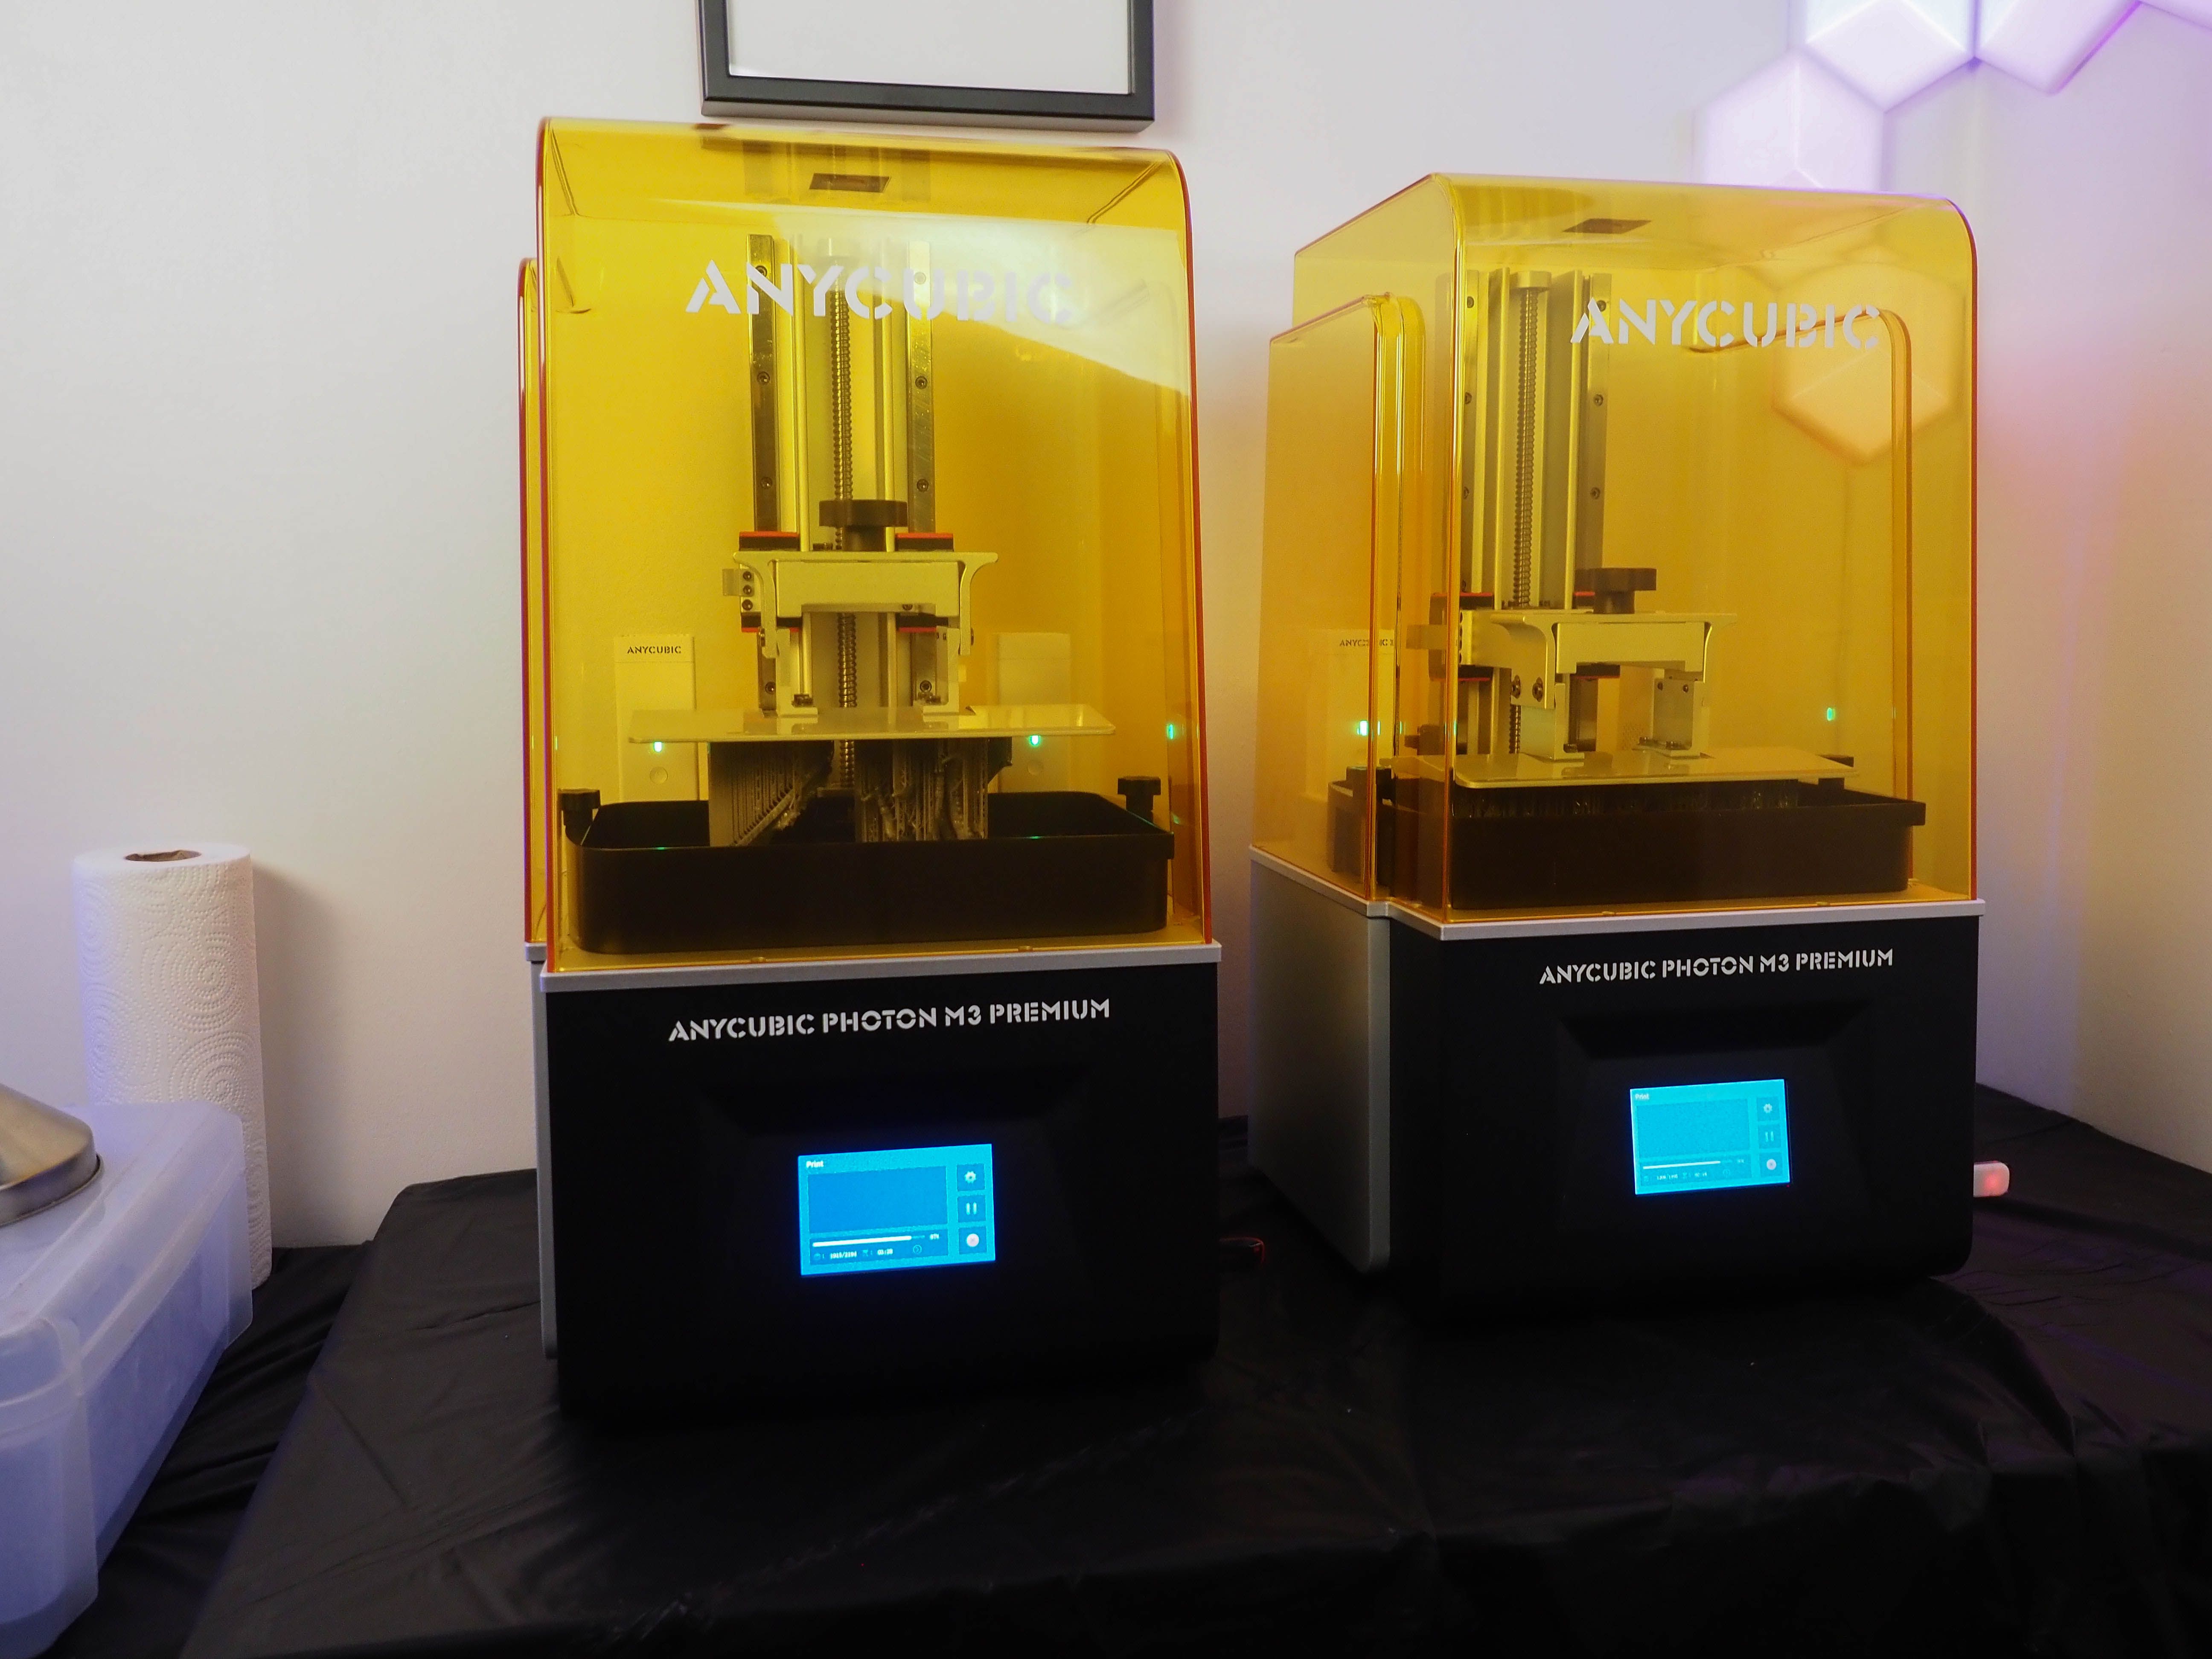 Anycubic M3 Premium double print with air purifiers